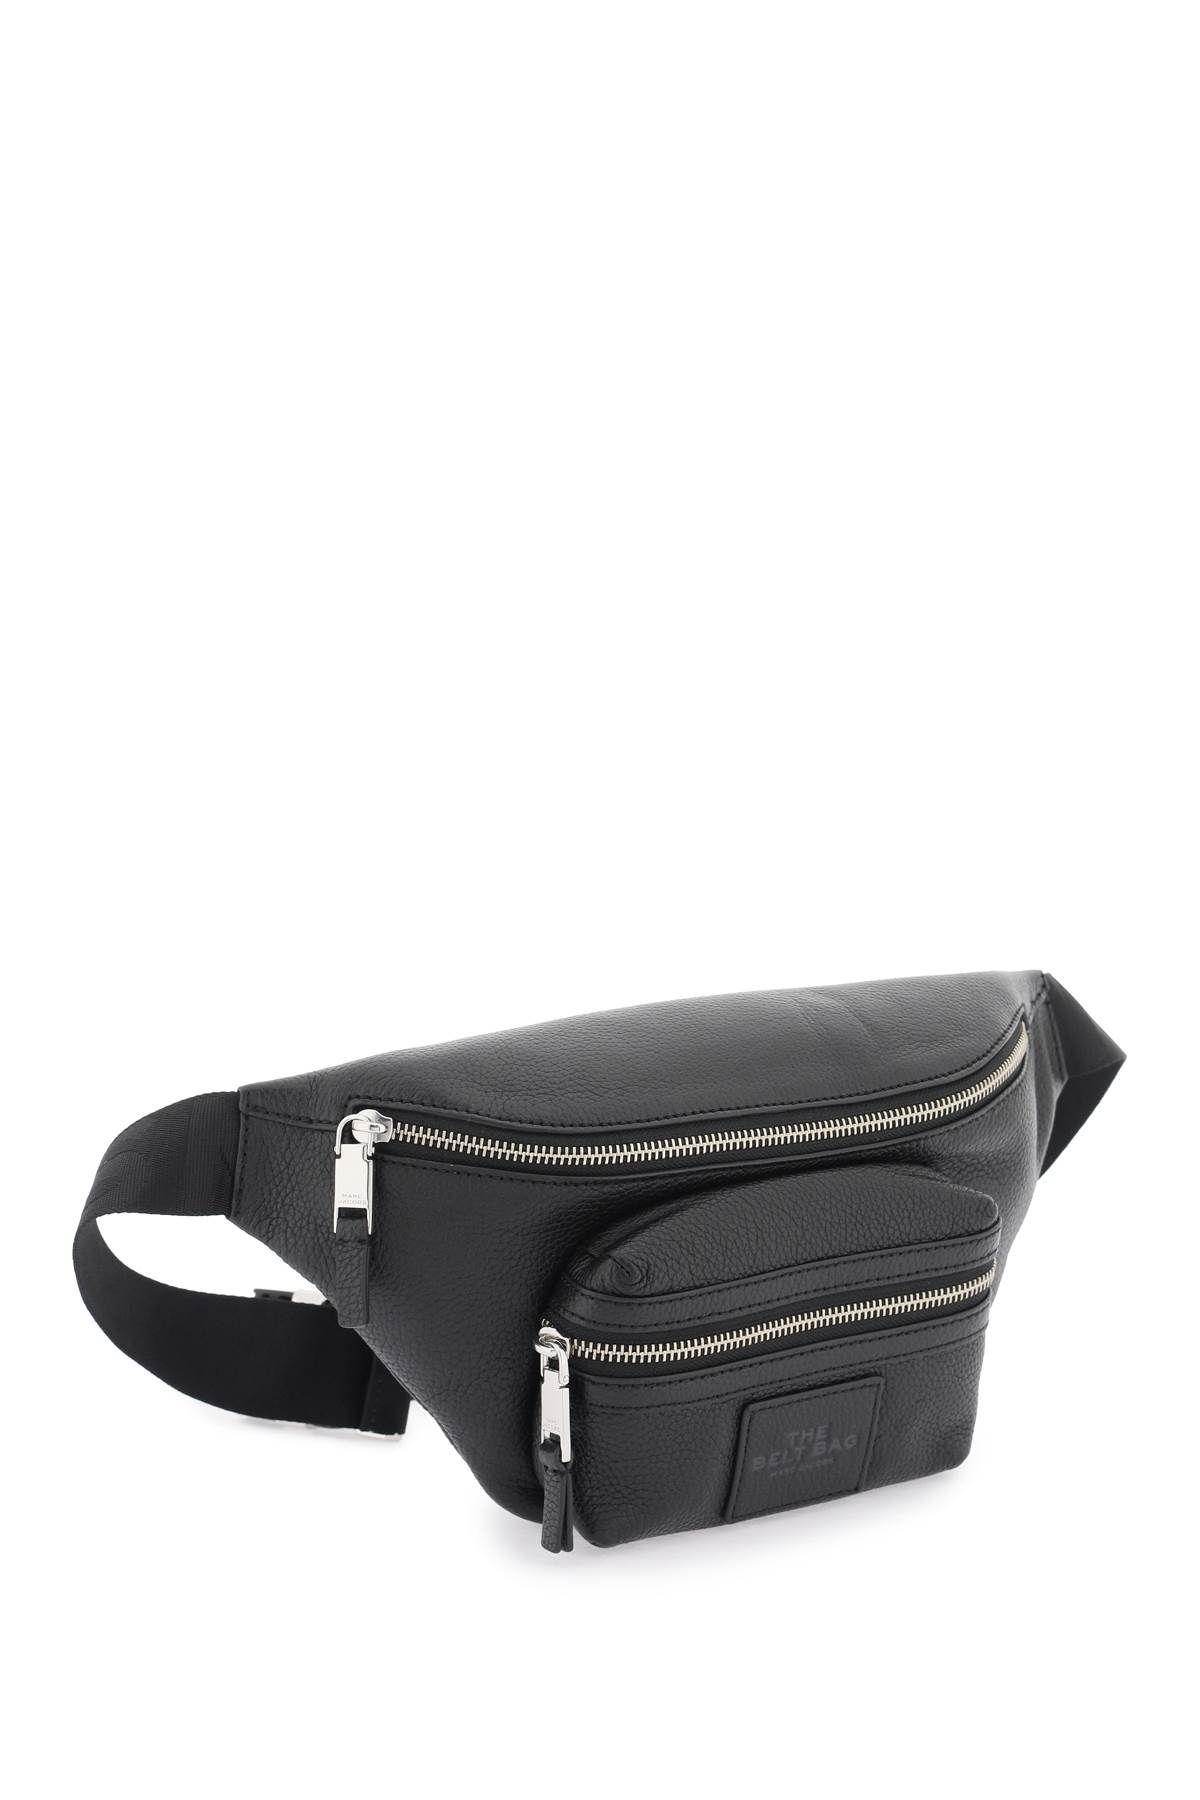 Shop Marc Jacobs Leather Belt Bag: The Perfect In Black